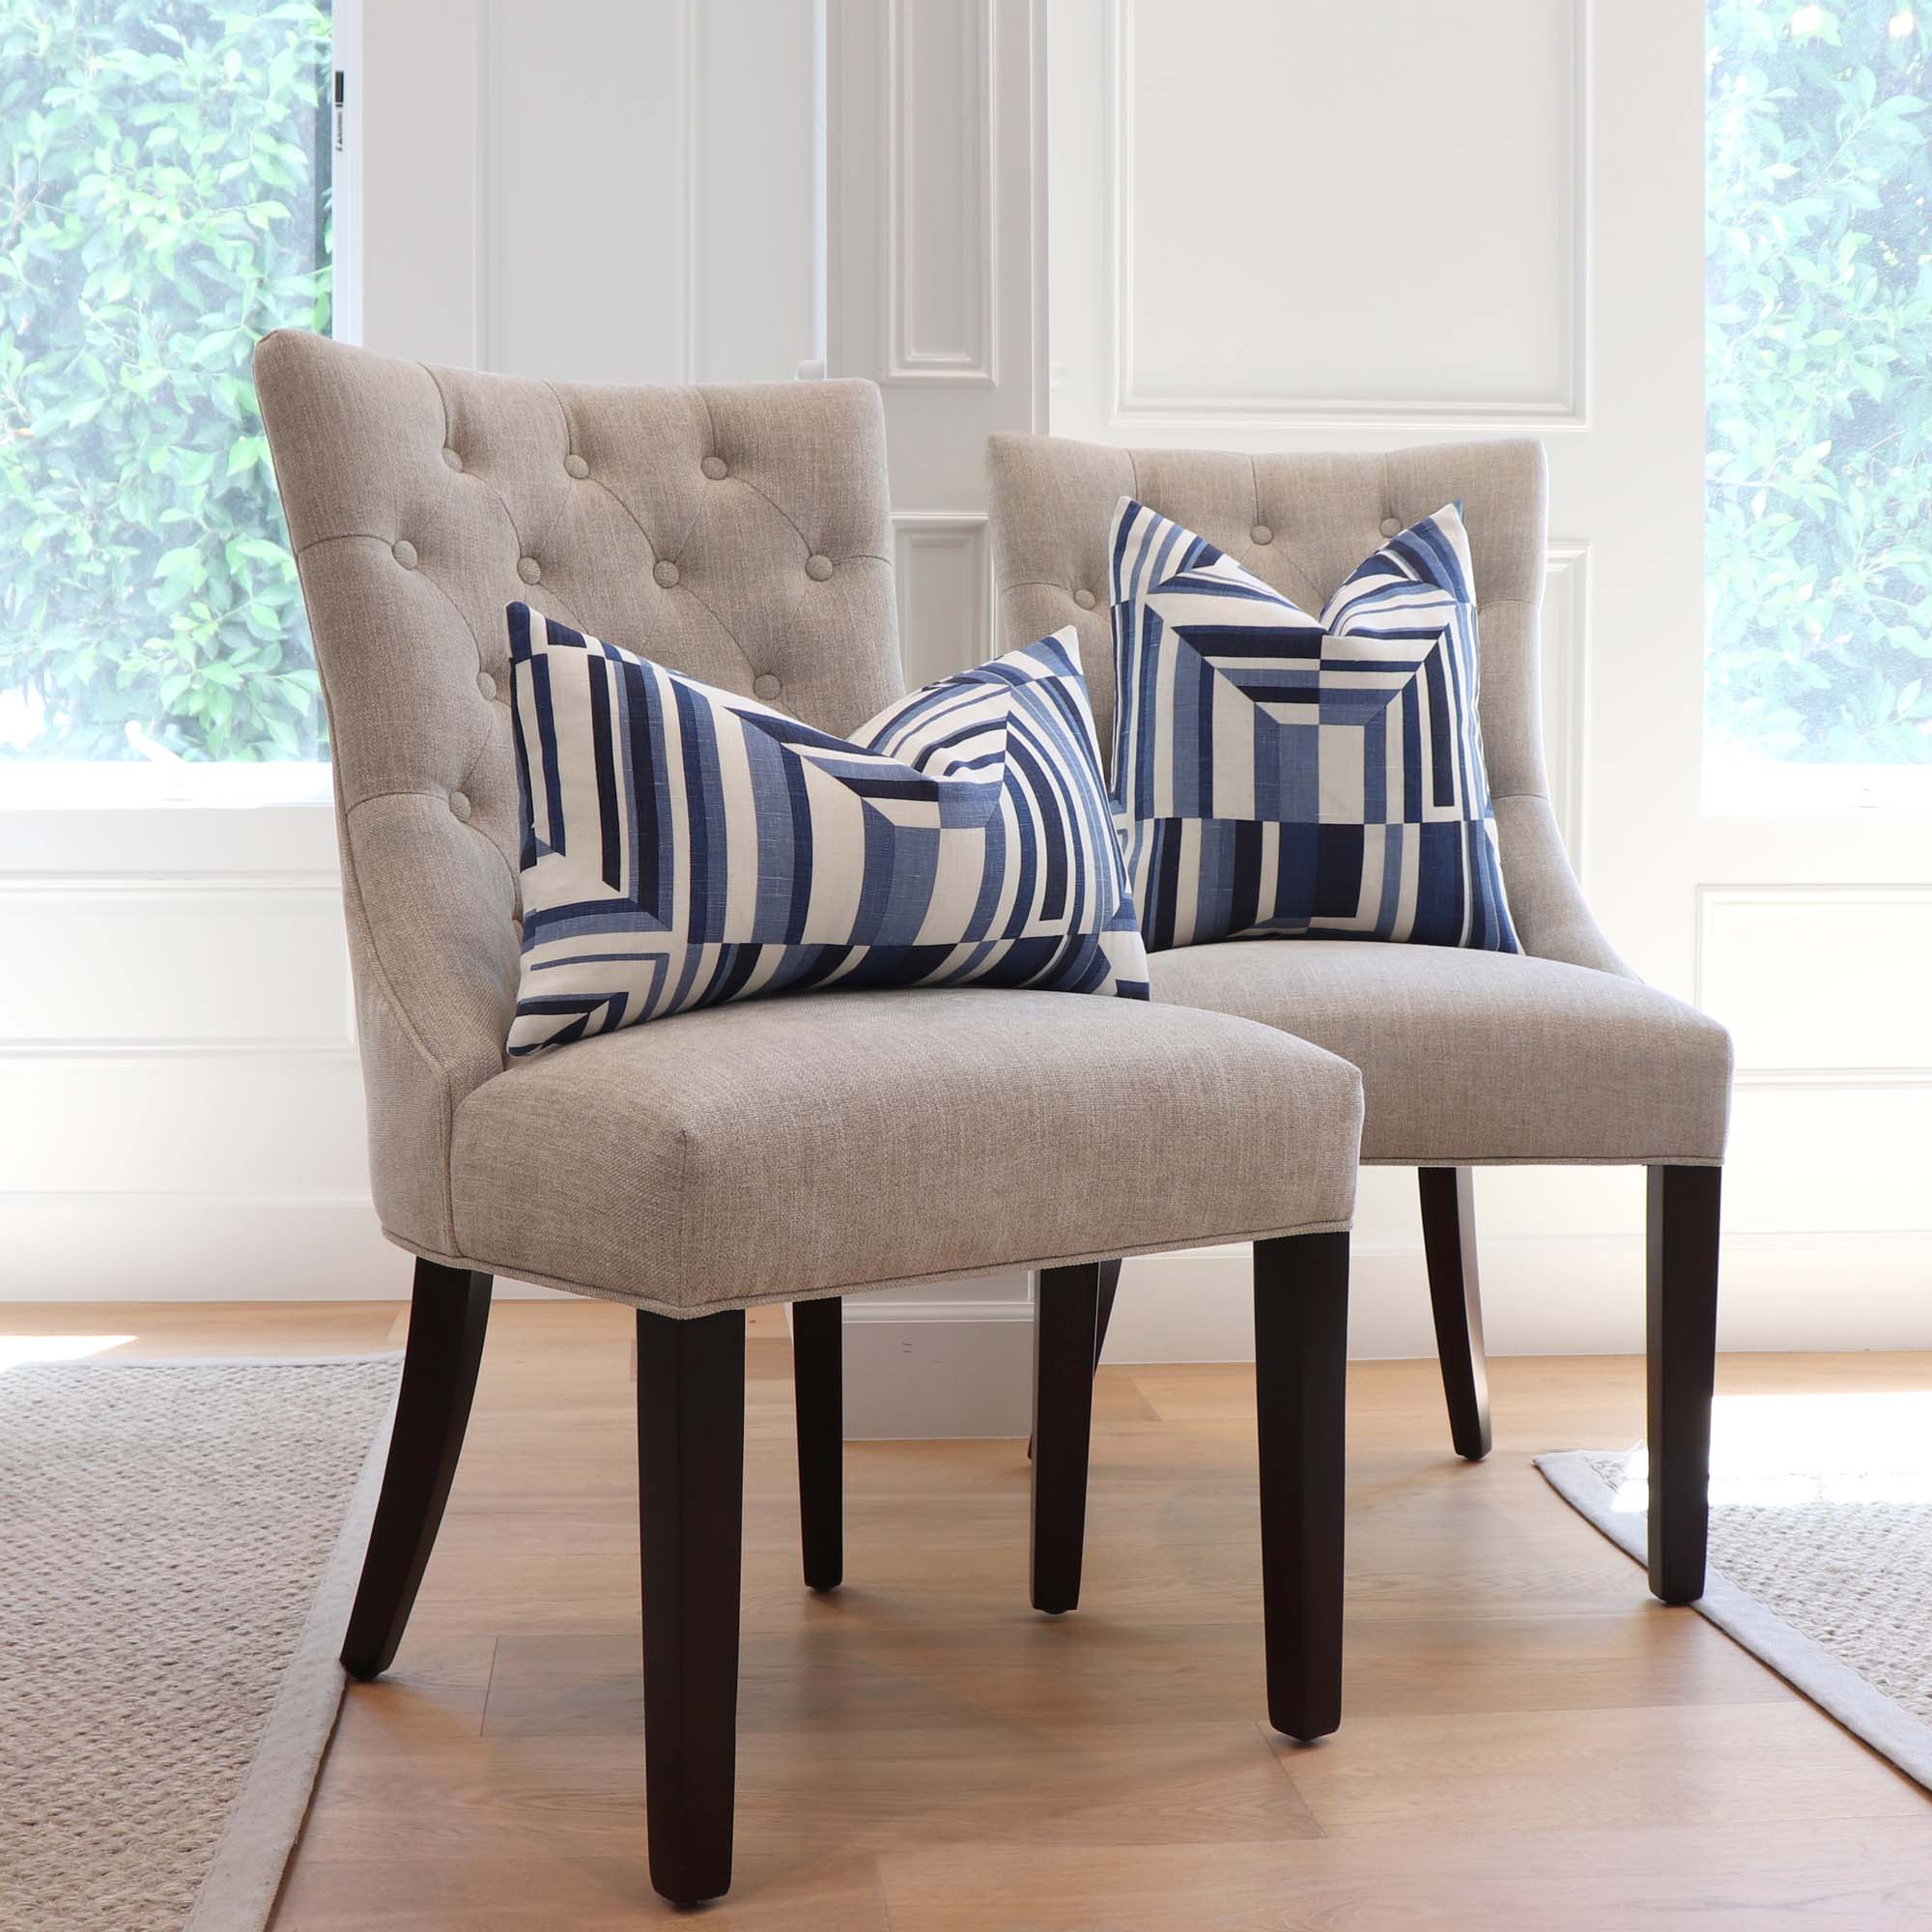 https://www.chloeandolive.com/cdn/shop/products/Thibaut-Cubism-Geometric-Blue-White-Stripes-Linen-Designer-Luxury-Decorative-Throw-Pillow-Cover-on-Dining-Chairs-in-Home_5000x.jpg?v=1660332637